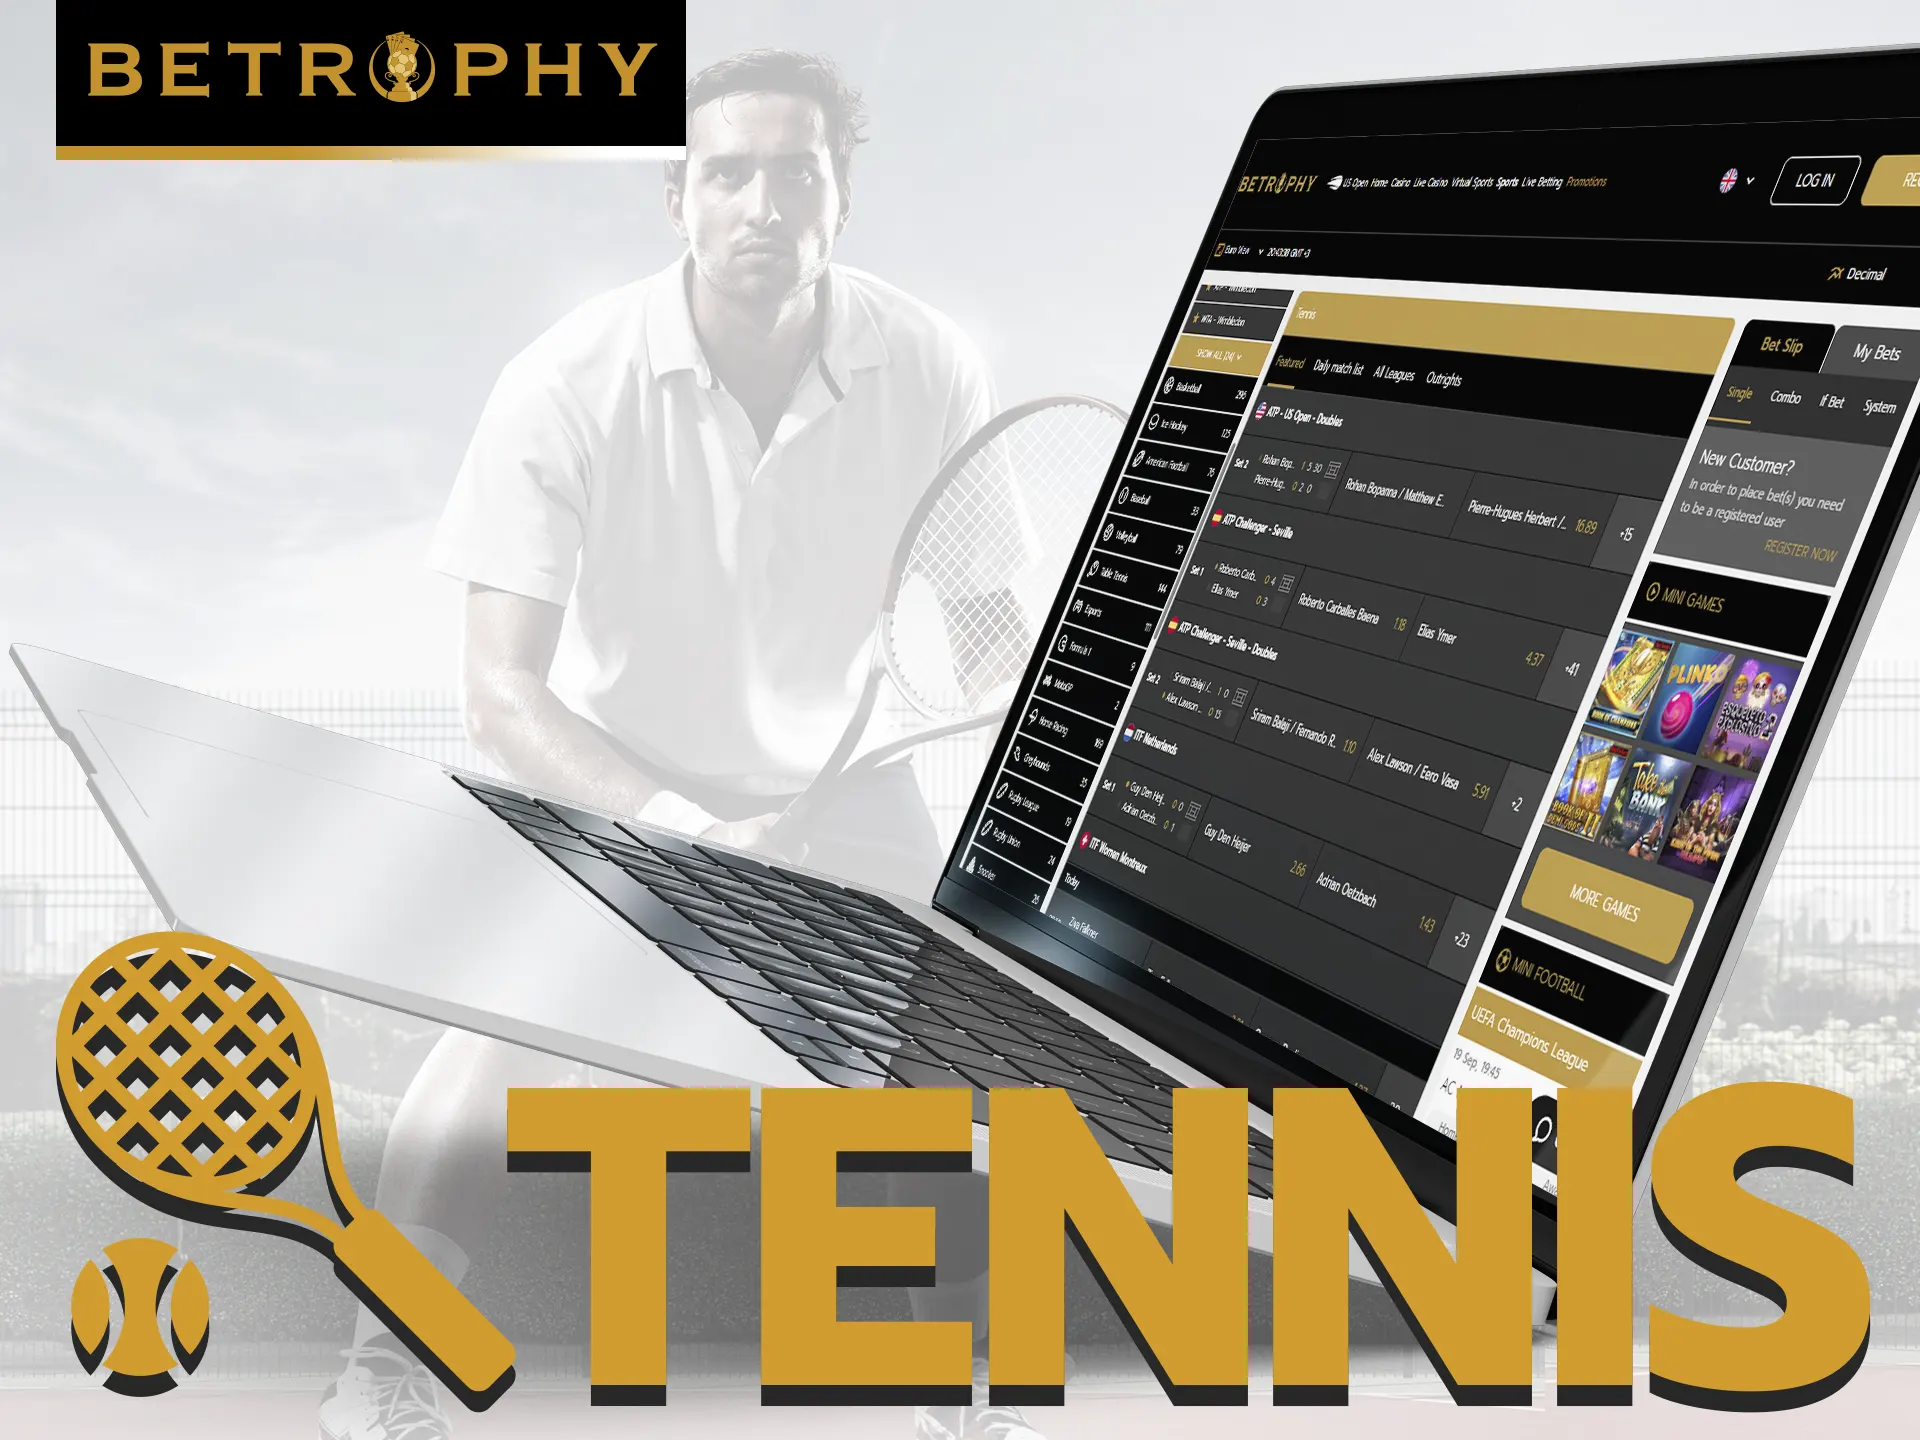 Place your bets on tennis with Betrophy.